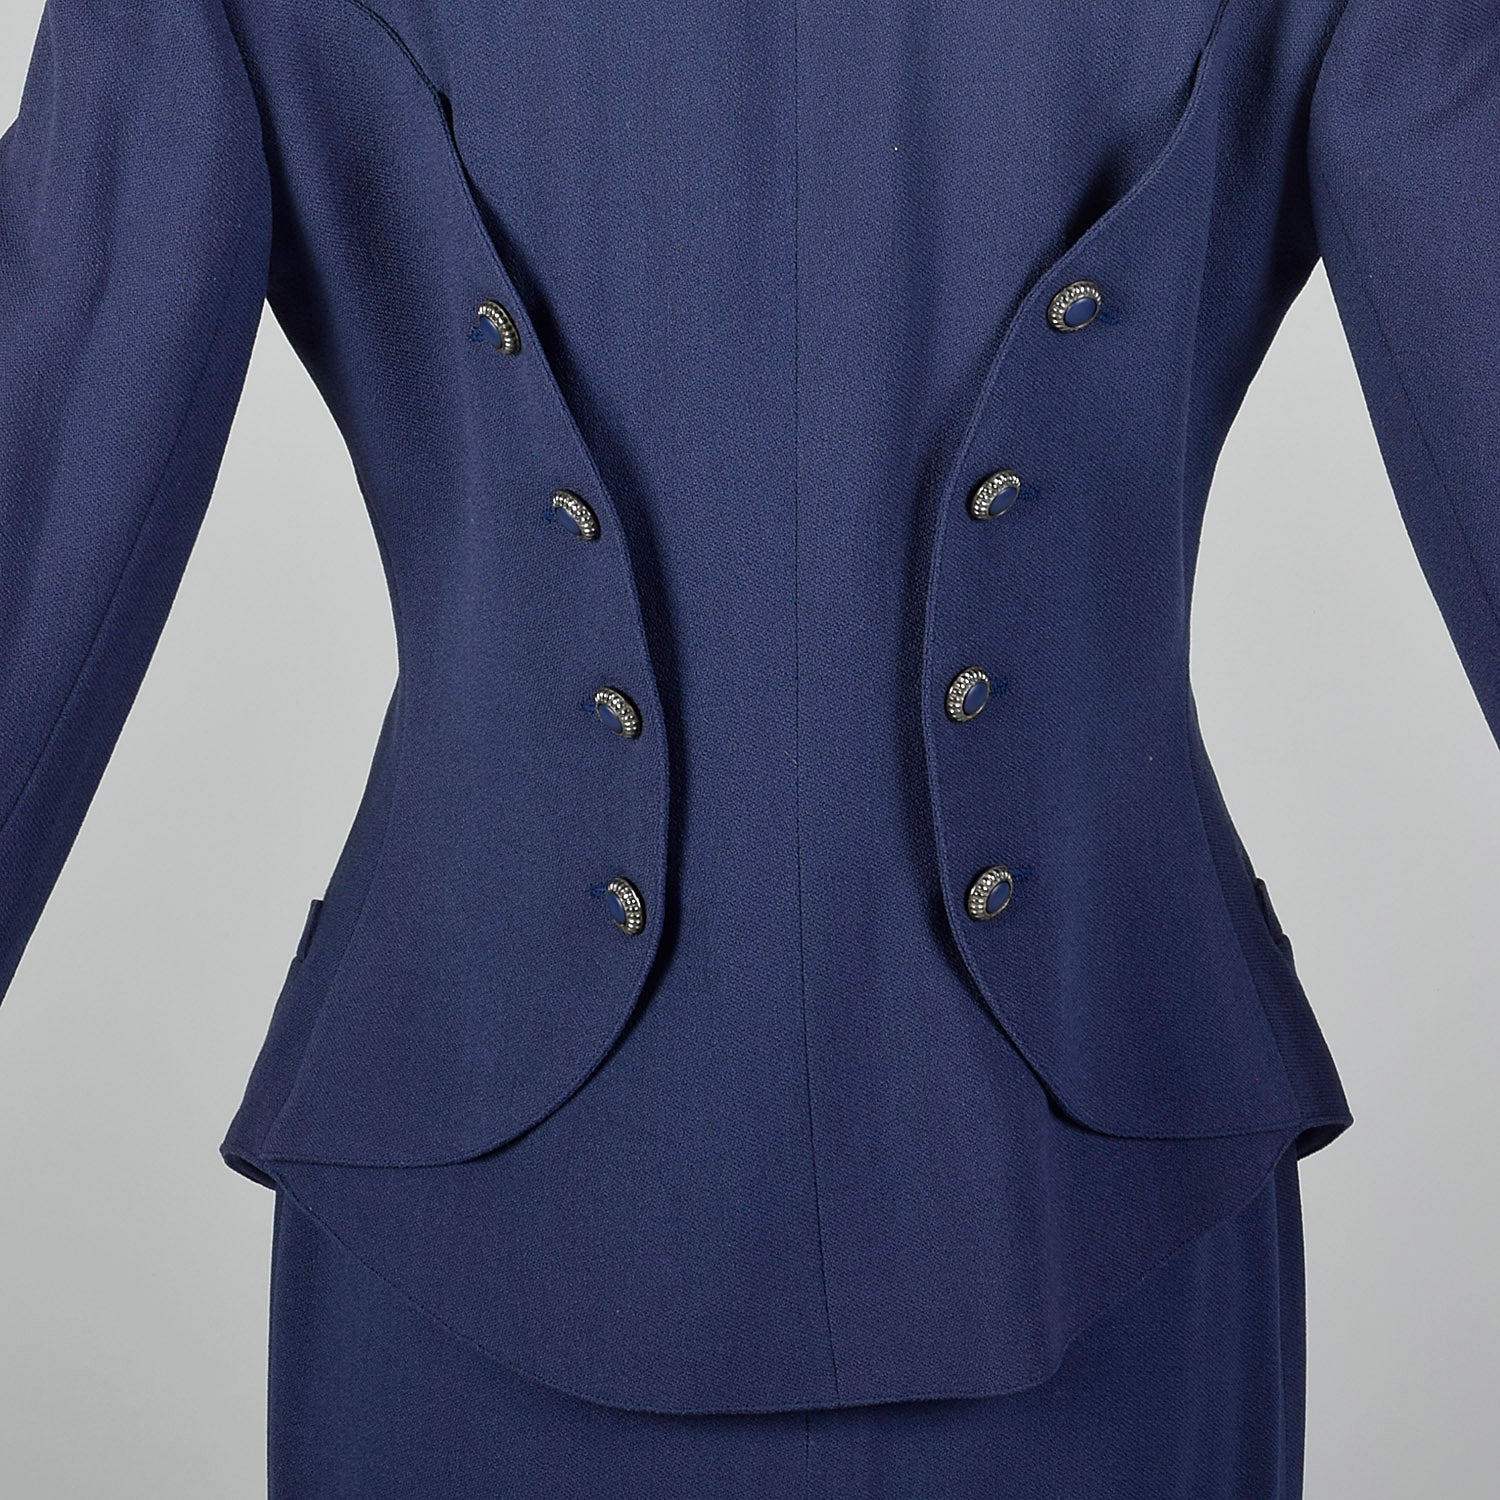 Small Karl Lagerfeld 1990s Blue Skirt Suit